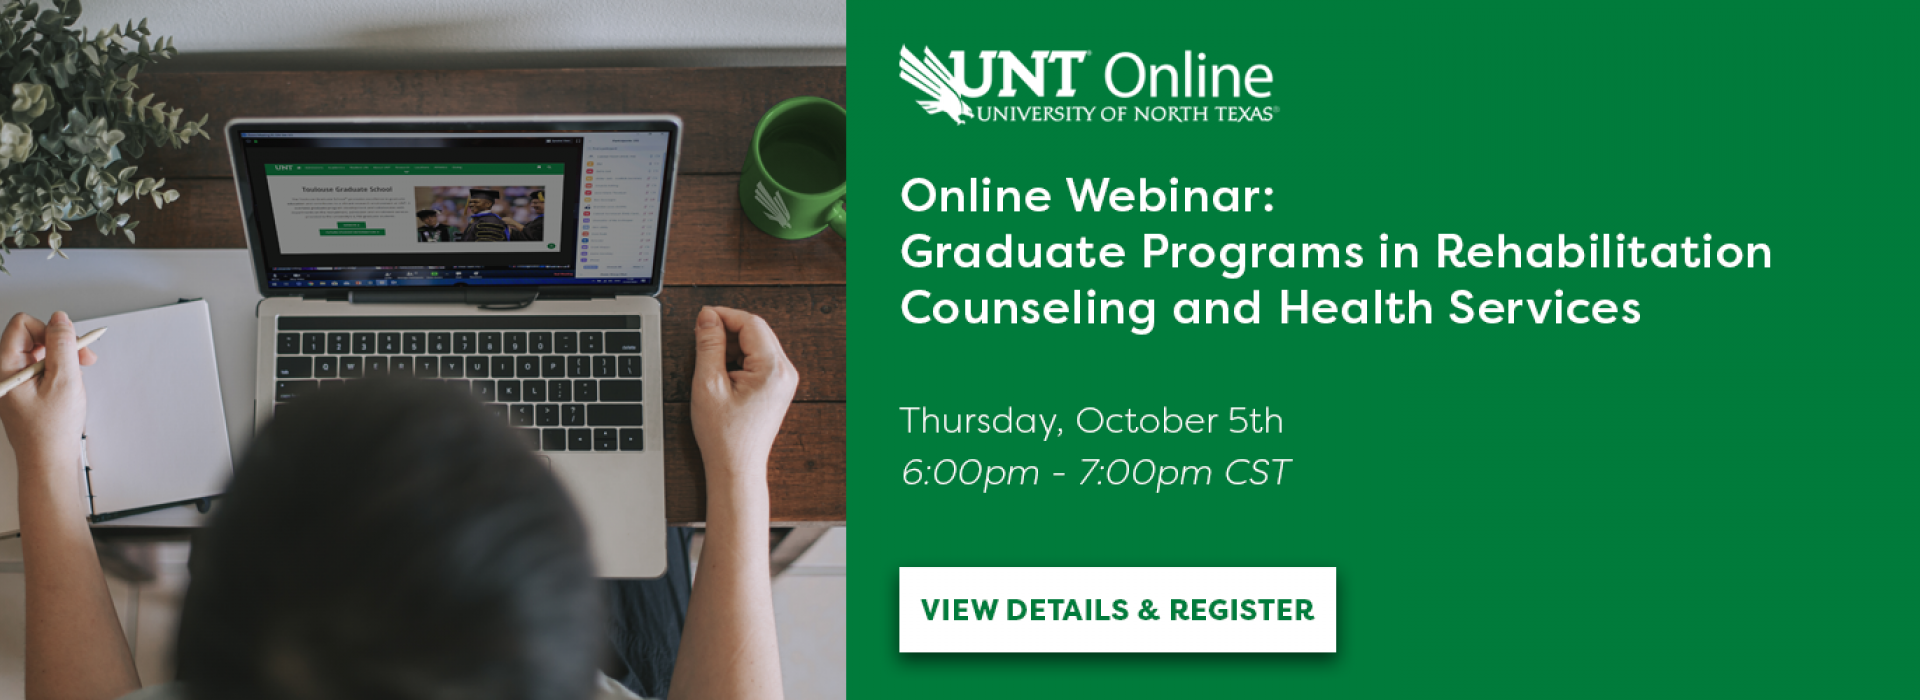 Graduate Programs in Rehabilitation Counseling and Health Services Oct. 5 6pm